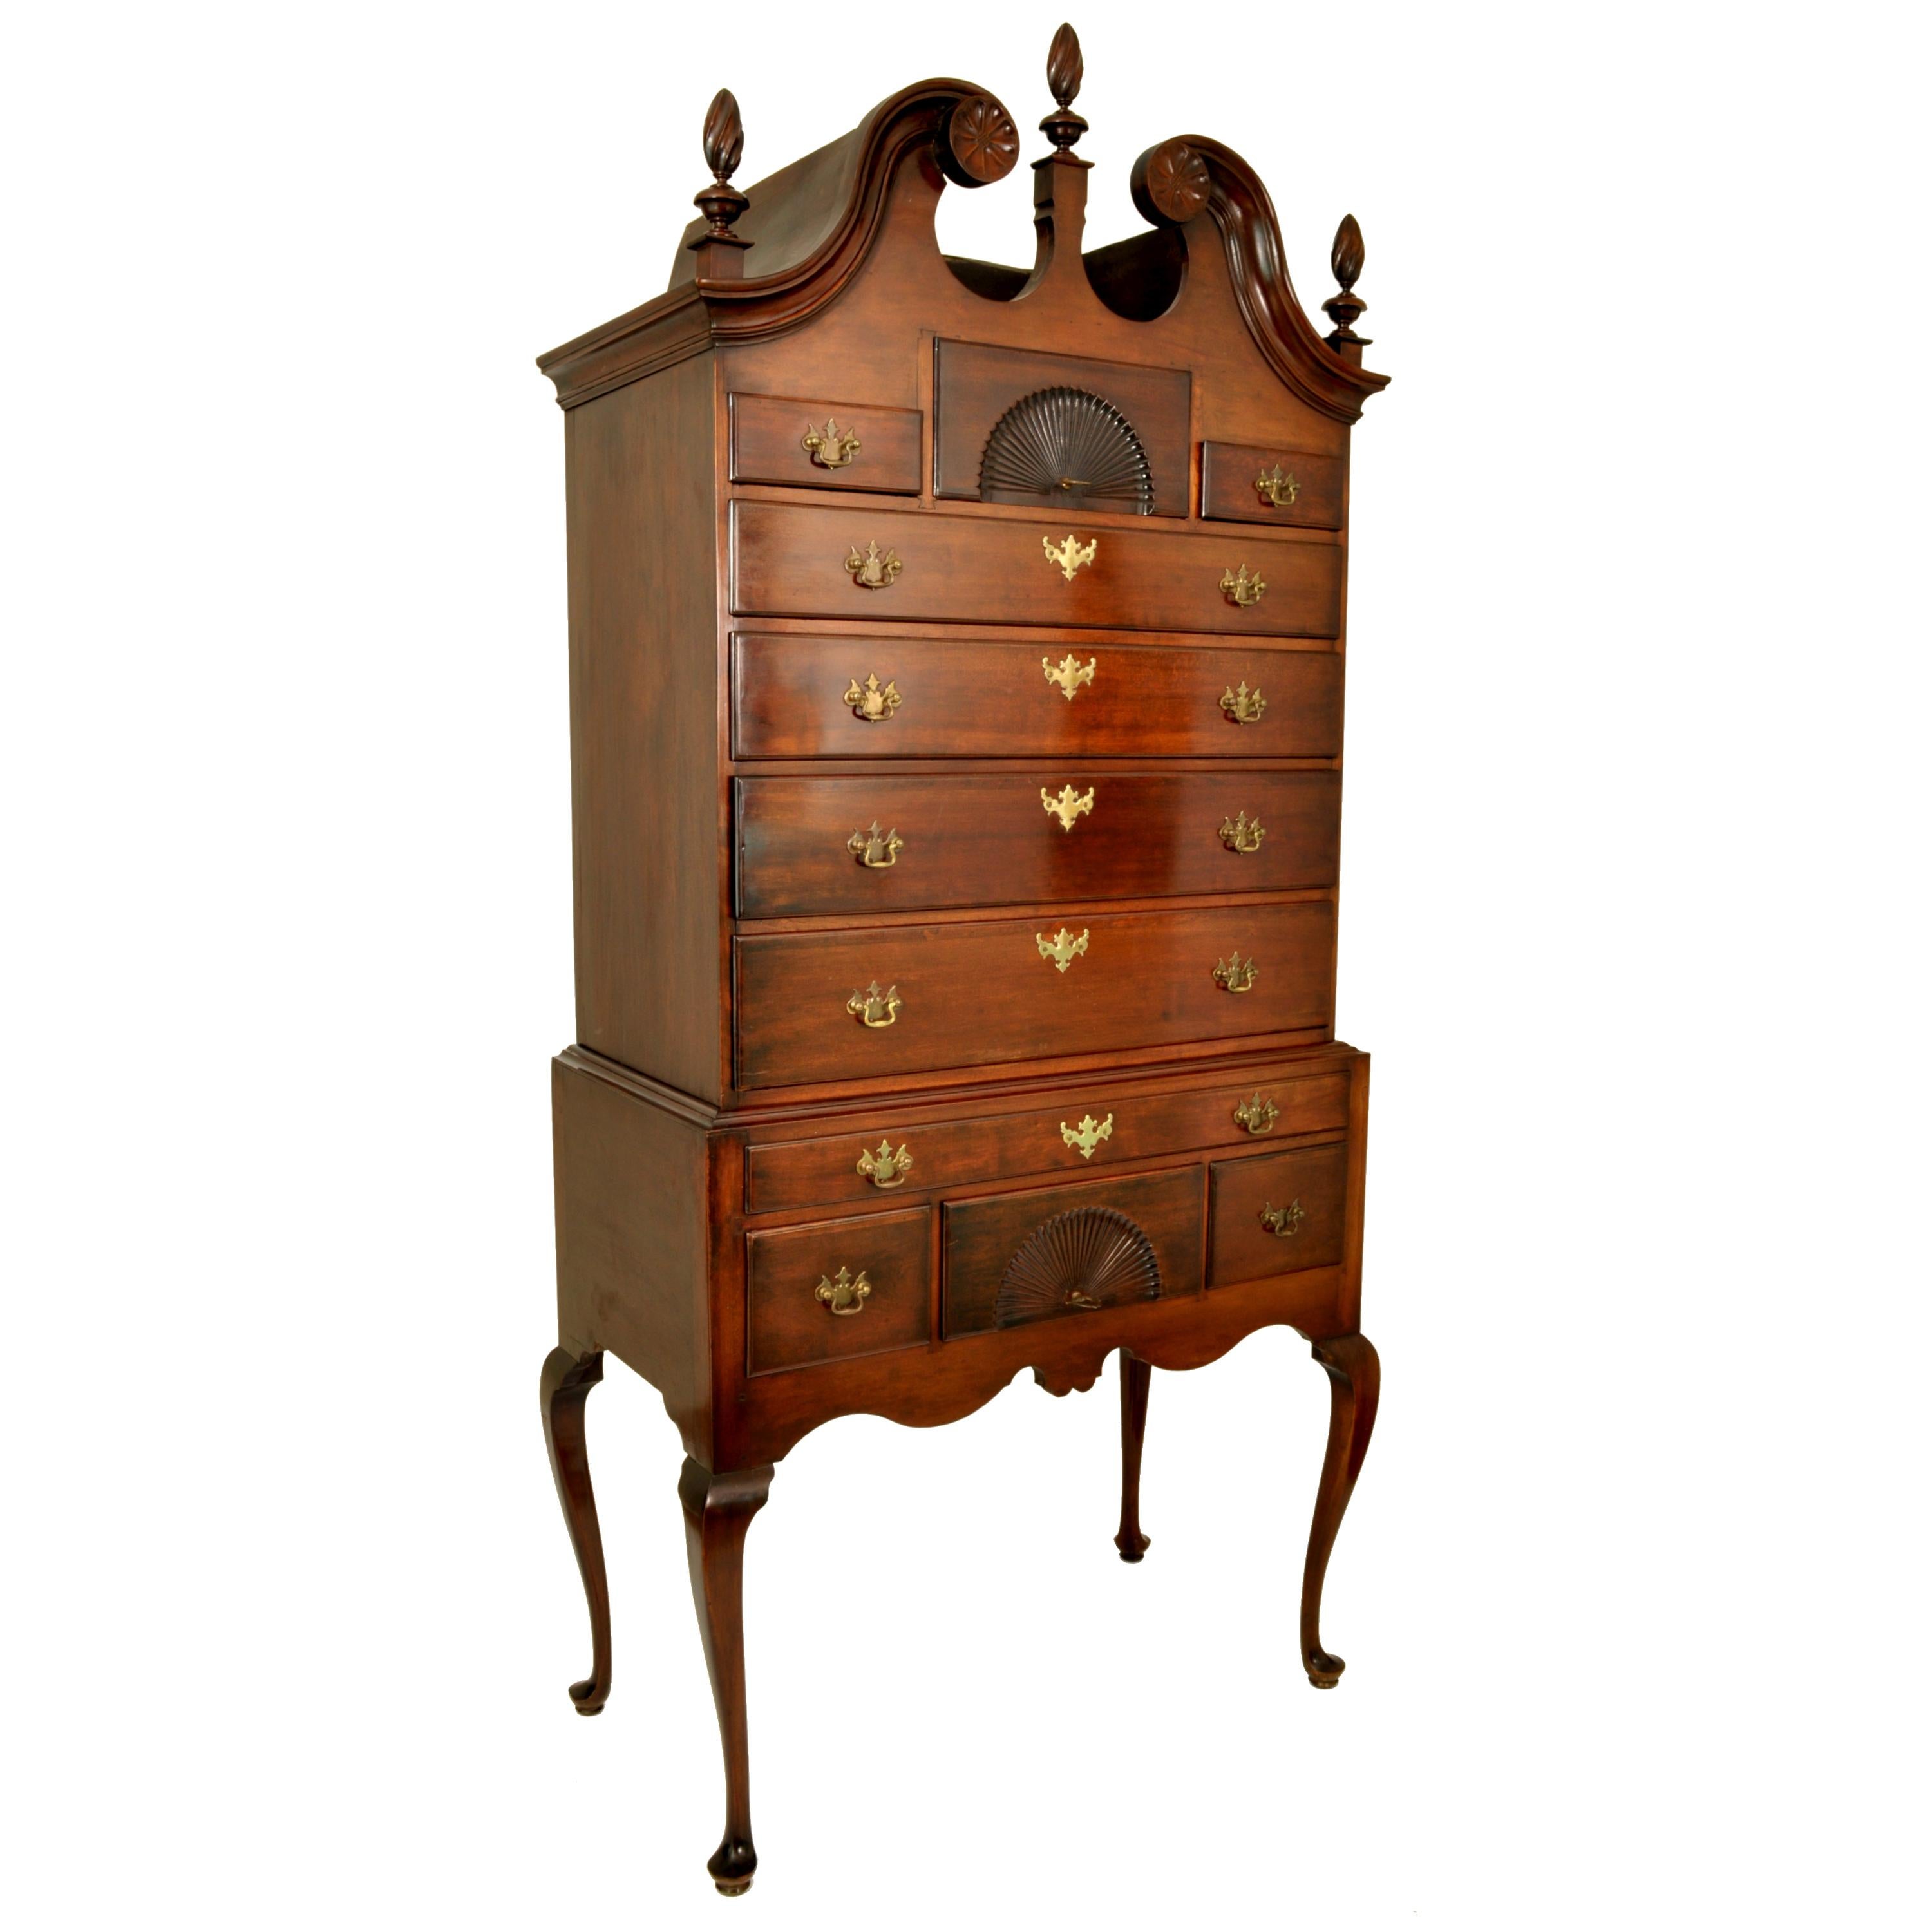 Fine Antique American 18th century Chippendale mahogany highboy/chest on stand, most likely Boston, Circa 1760.
The highboy having two sections, the top section having a 'Swan's Neck